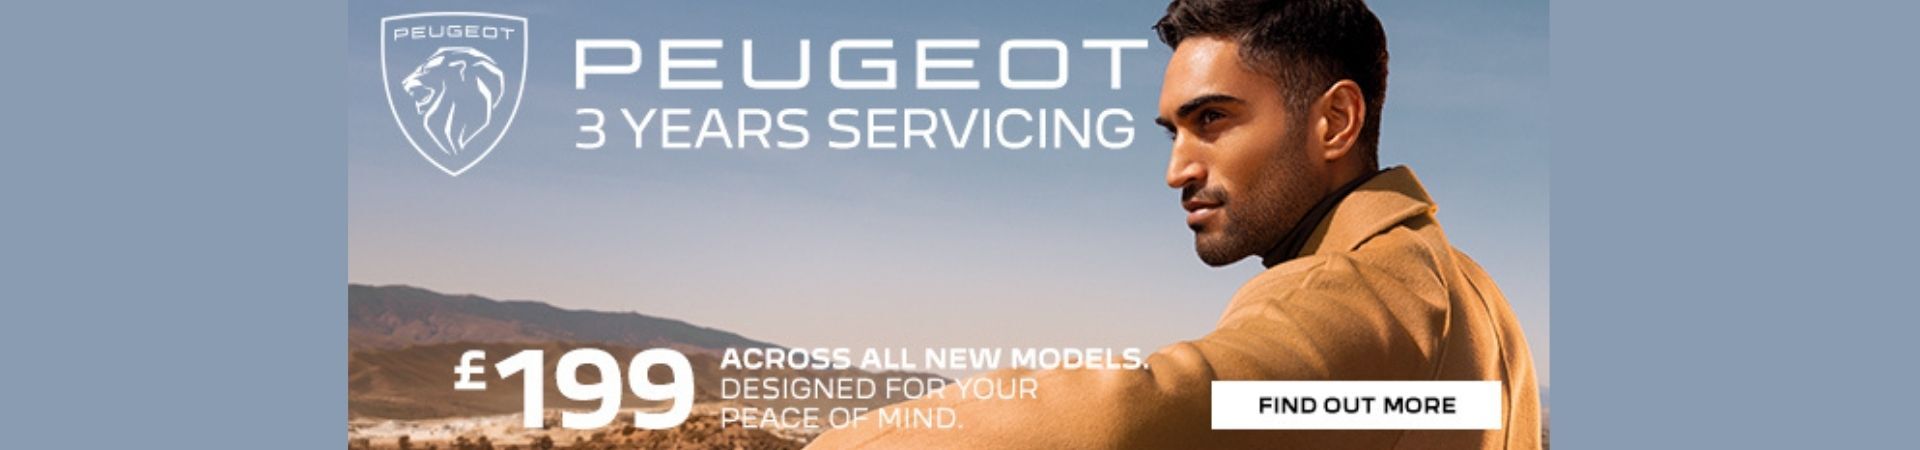 Peugeot 3 Years Servicing Banner Image